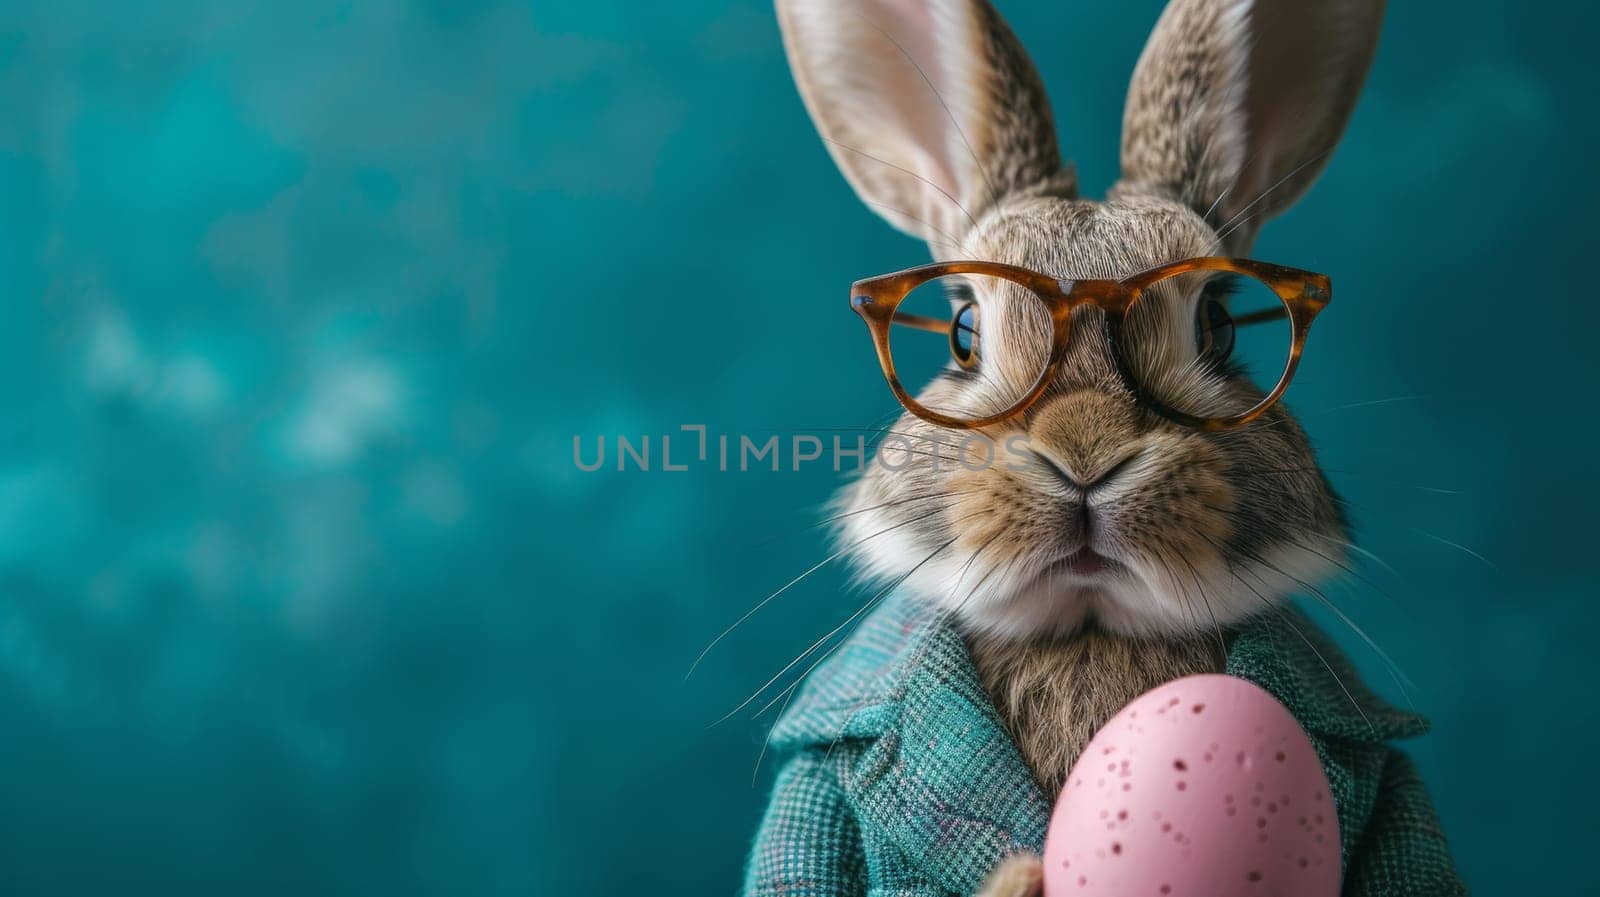 A rabbit wearing glasses holding a pink egg in its mouth